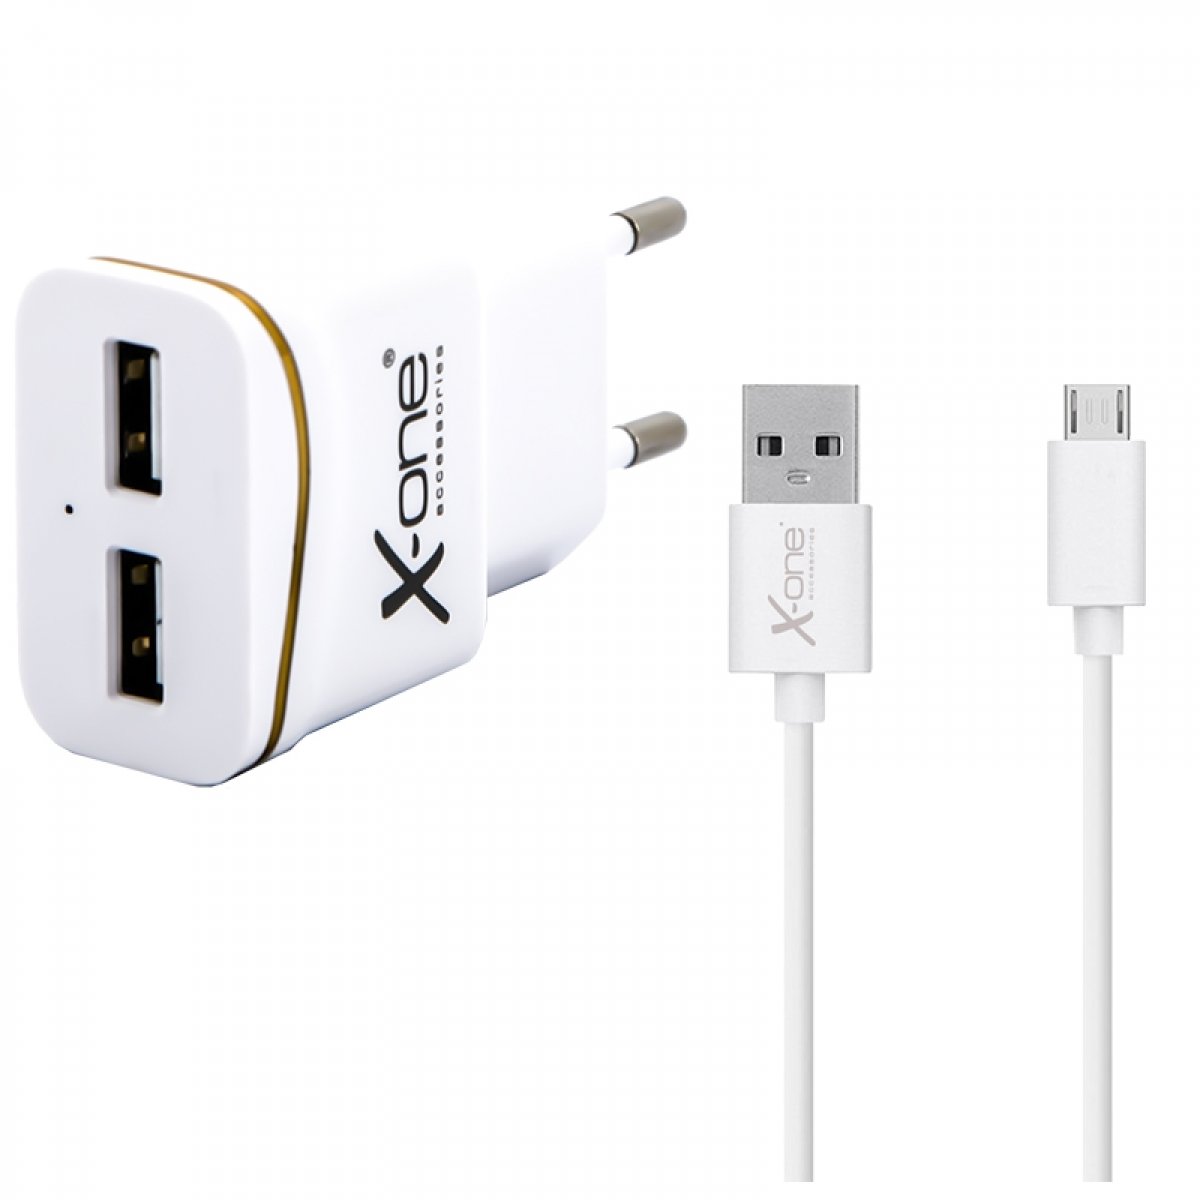 KIT CARGADOR RED 2 USB 2.1A+CABLE USB C X-ONE